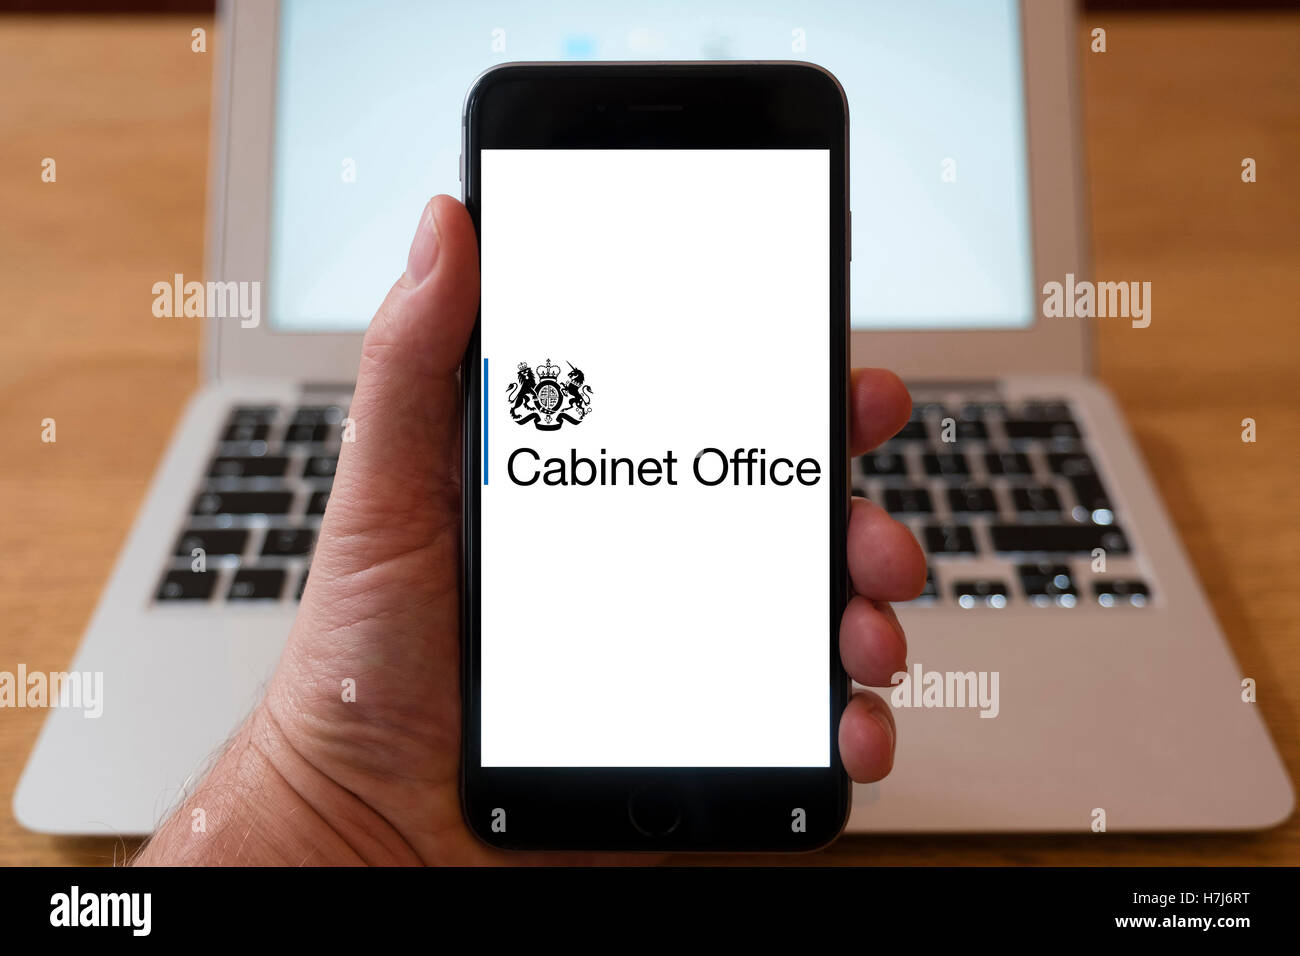 Using iPhone smart phone to display logo of the Cabinet office, UK Government Stock Photo